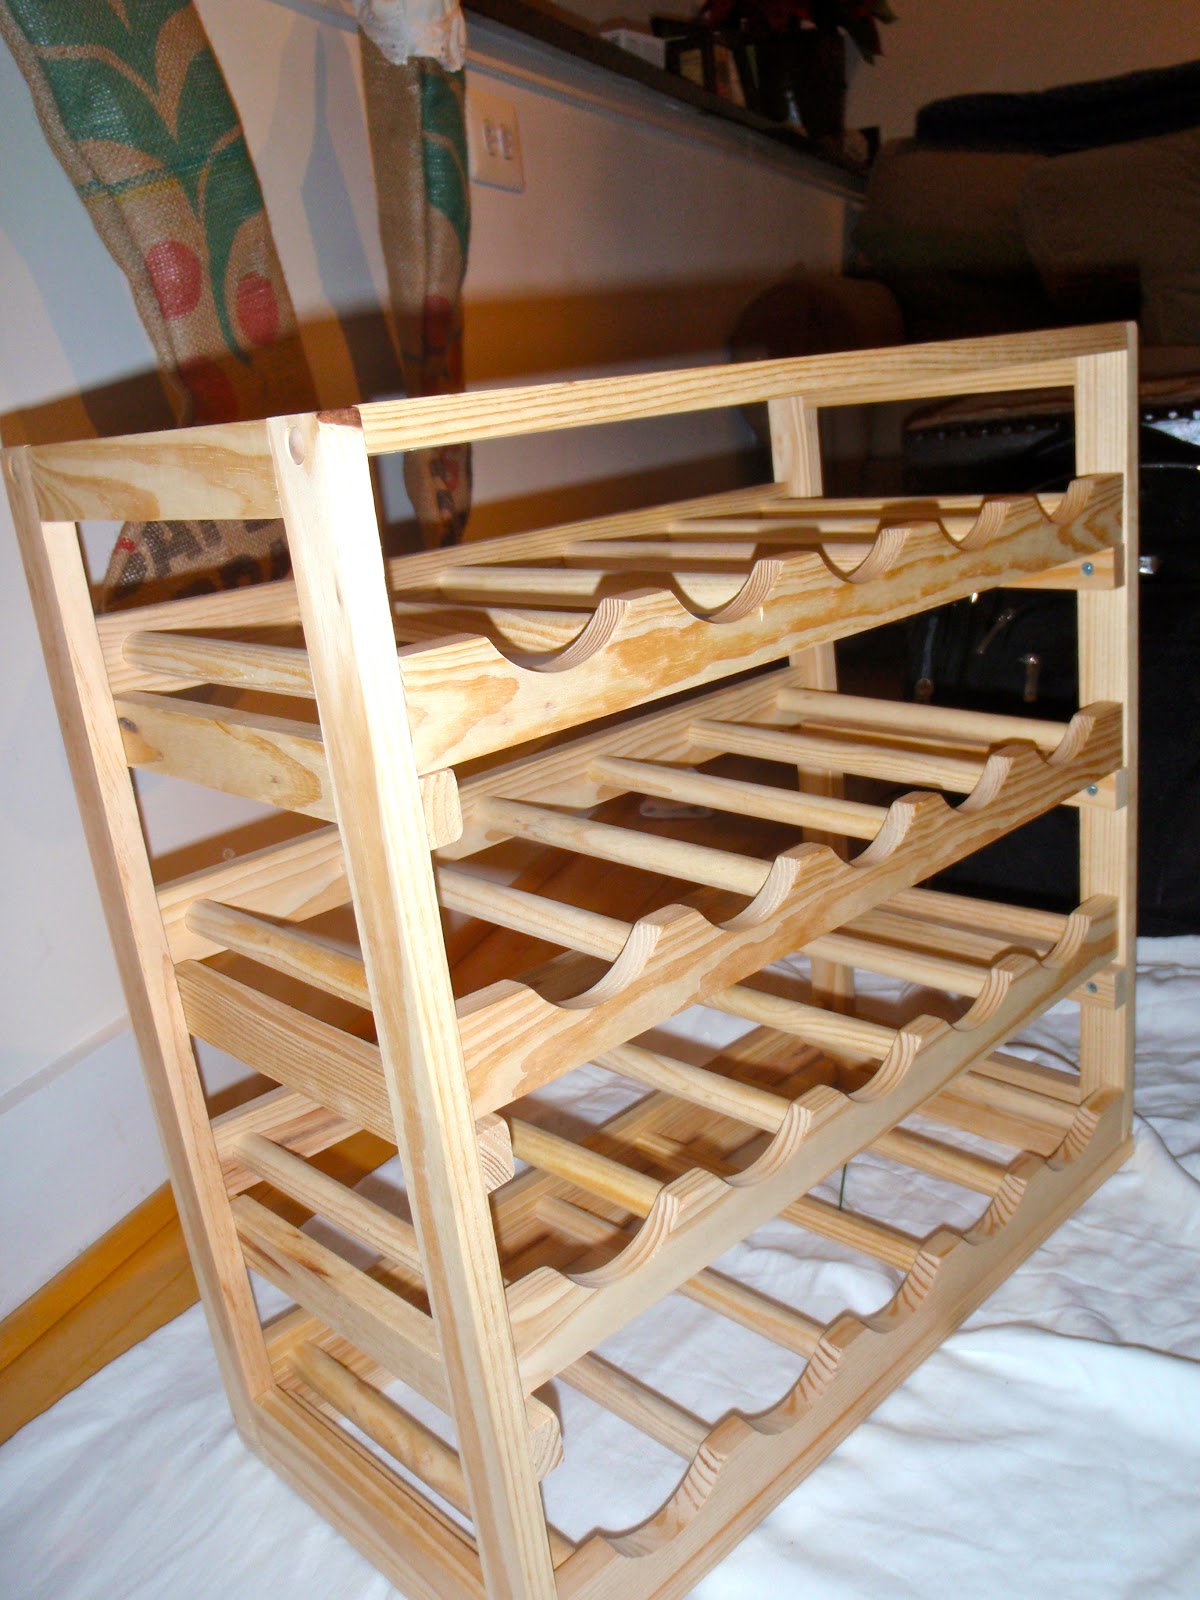 Best Woodworking Plans And Guide: Diy Wooden Wine Rack ...